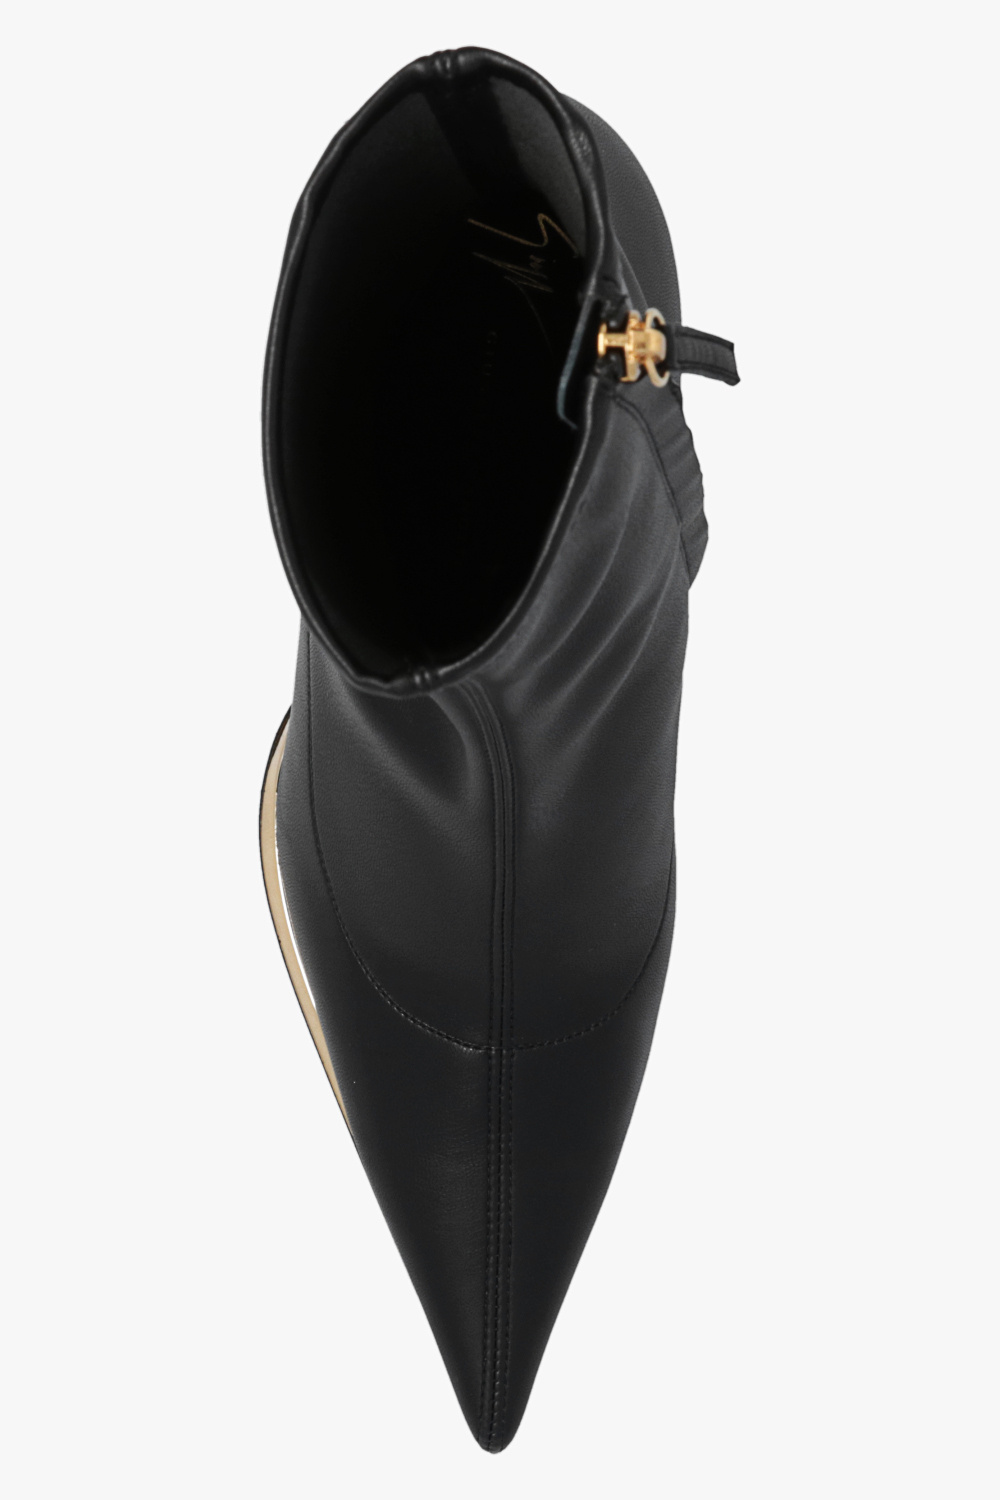 Giuseppe Zanotti The styles include a range of boots